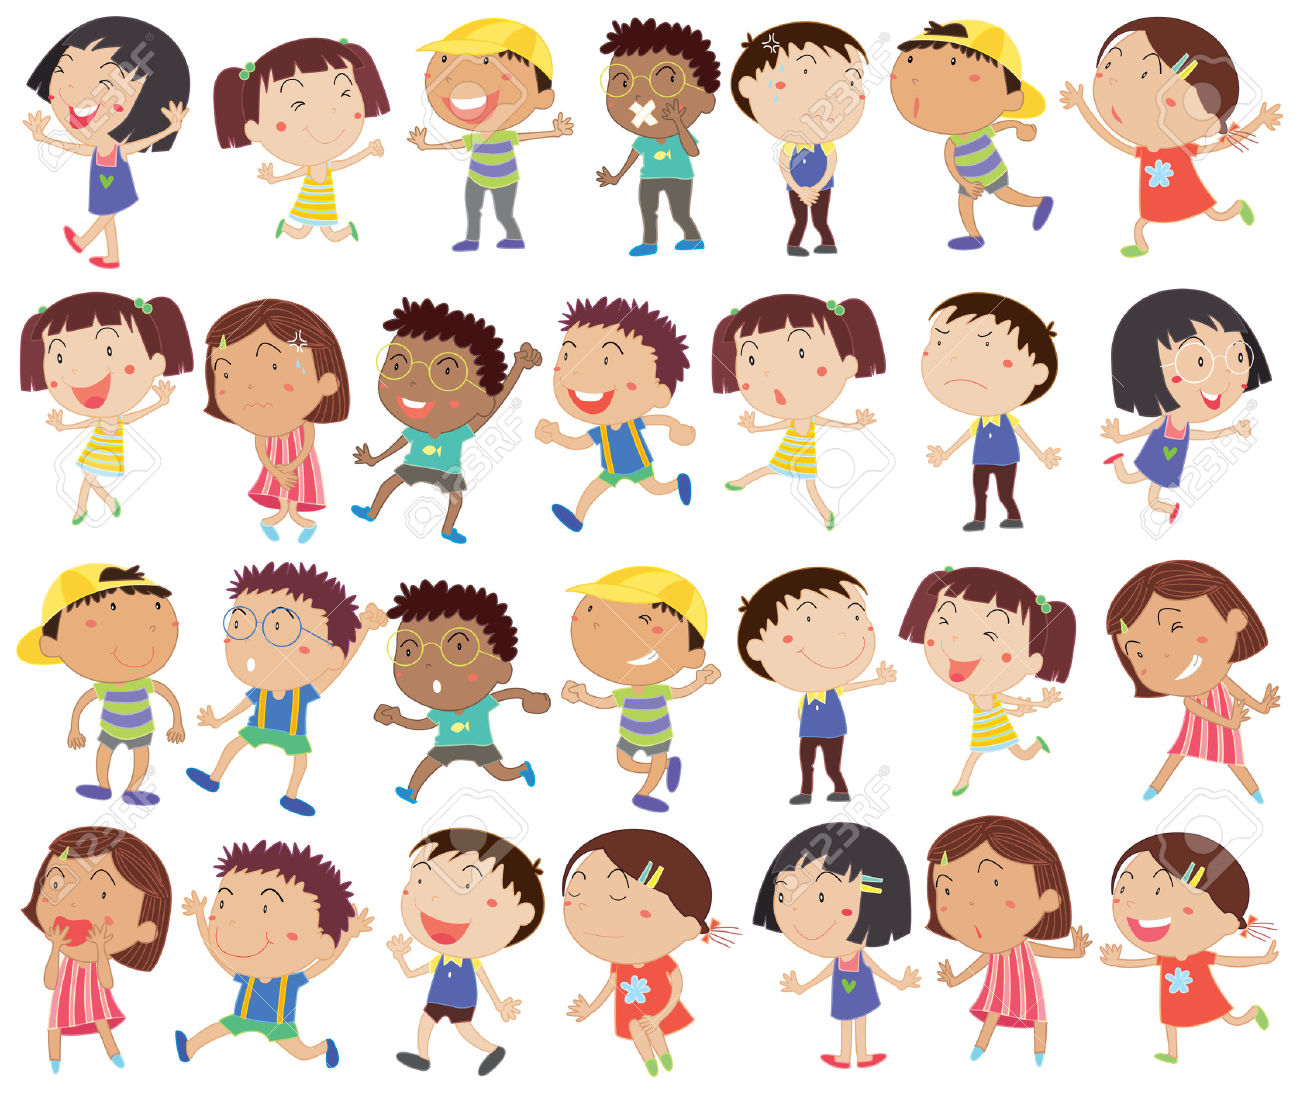 Emotion clipart for.